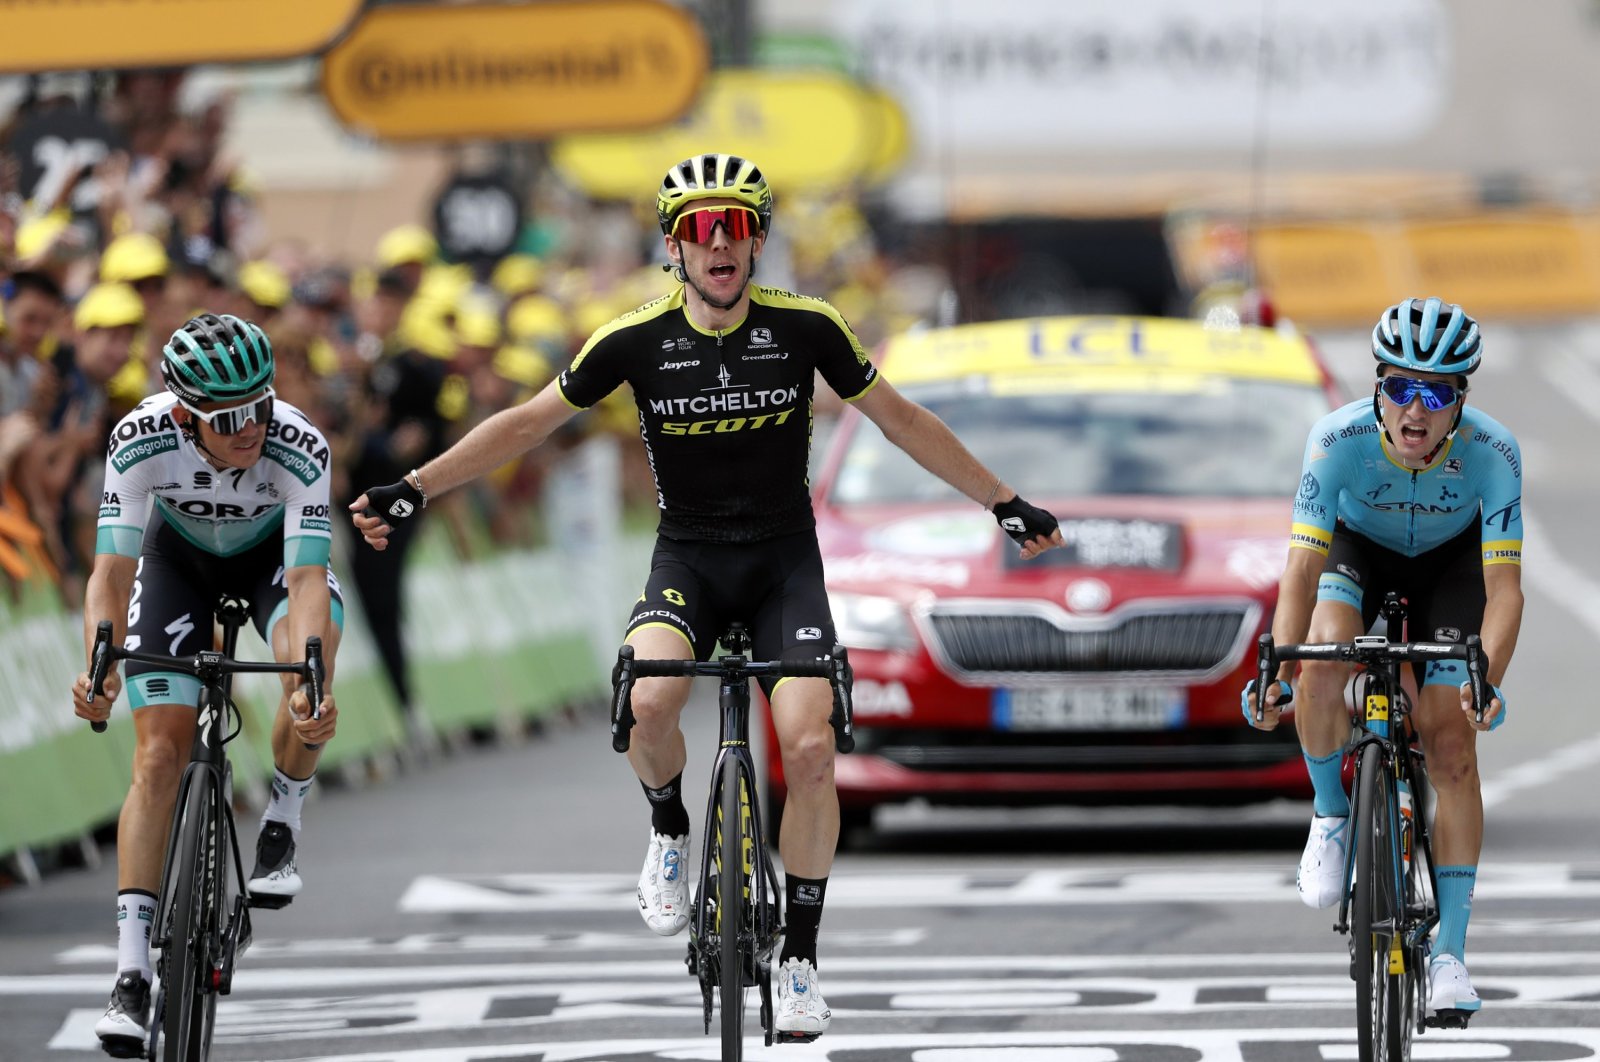 Simon Yates surrounded by Pello Bilbao Lopez De Armentia (R) and Gregor Muhlberger, as he crosses the finish line to win the twelfth stage of the Tour de France cycling race in Bagneres-de-Bigorre, France, July 18, 2019. (AP Photo)